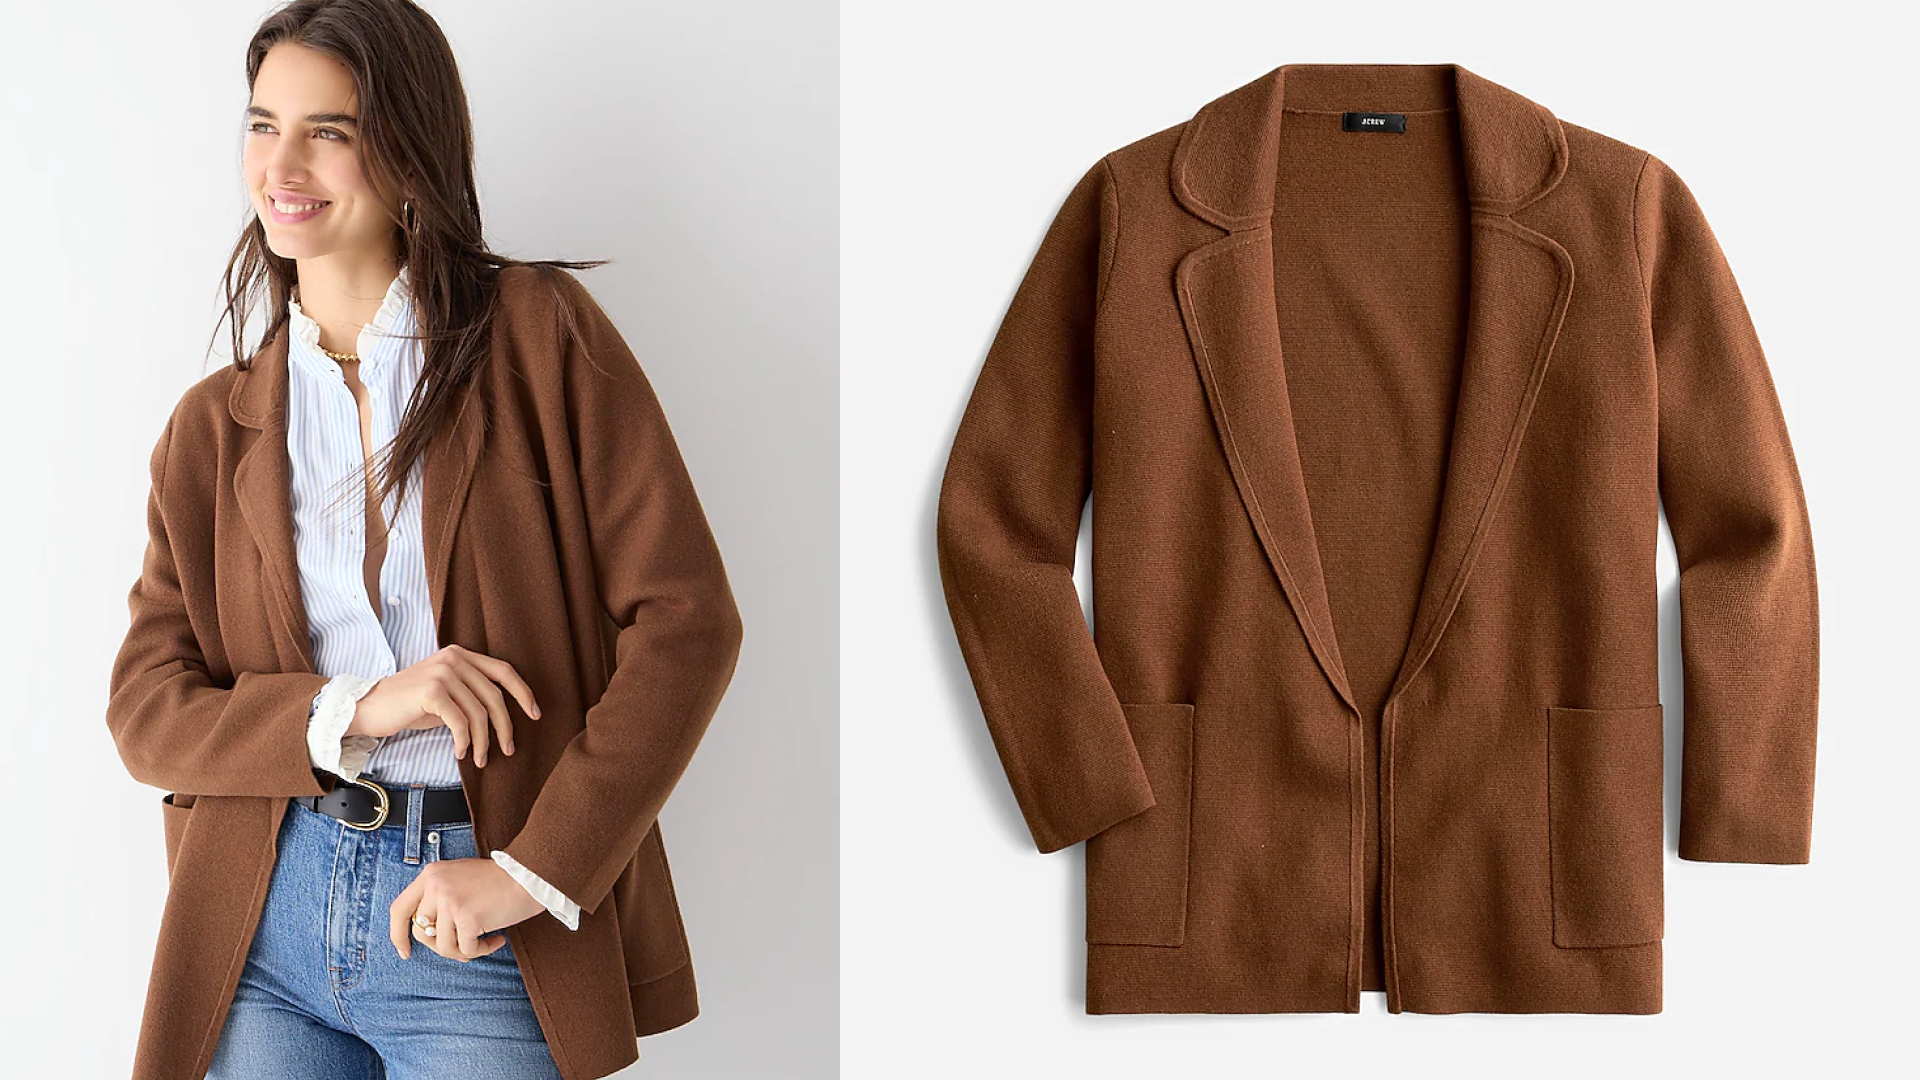 Skimm Faves: September's Bestselling Clothing and More